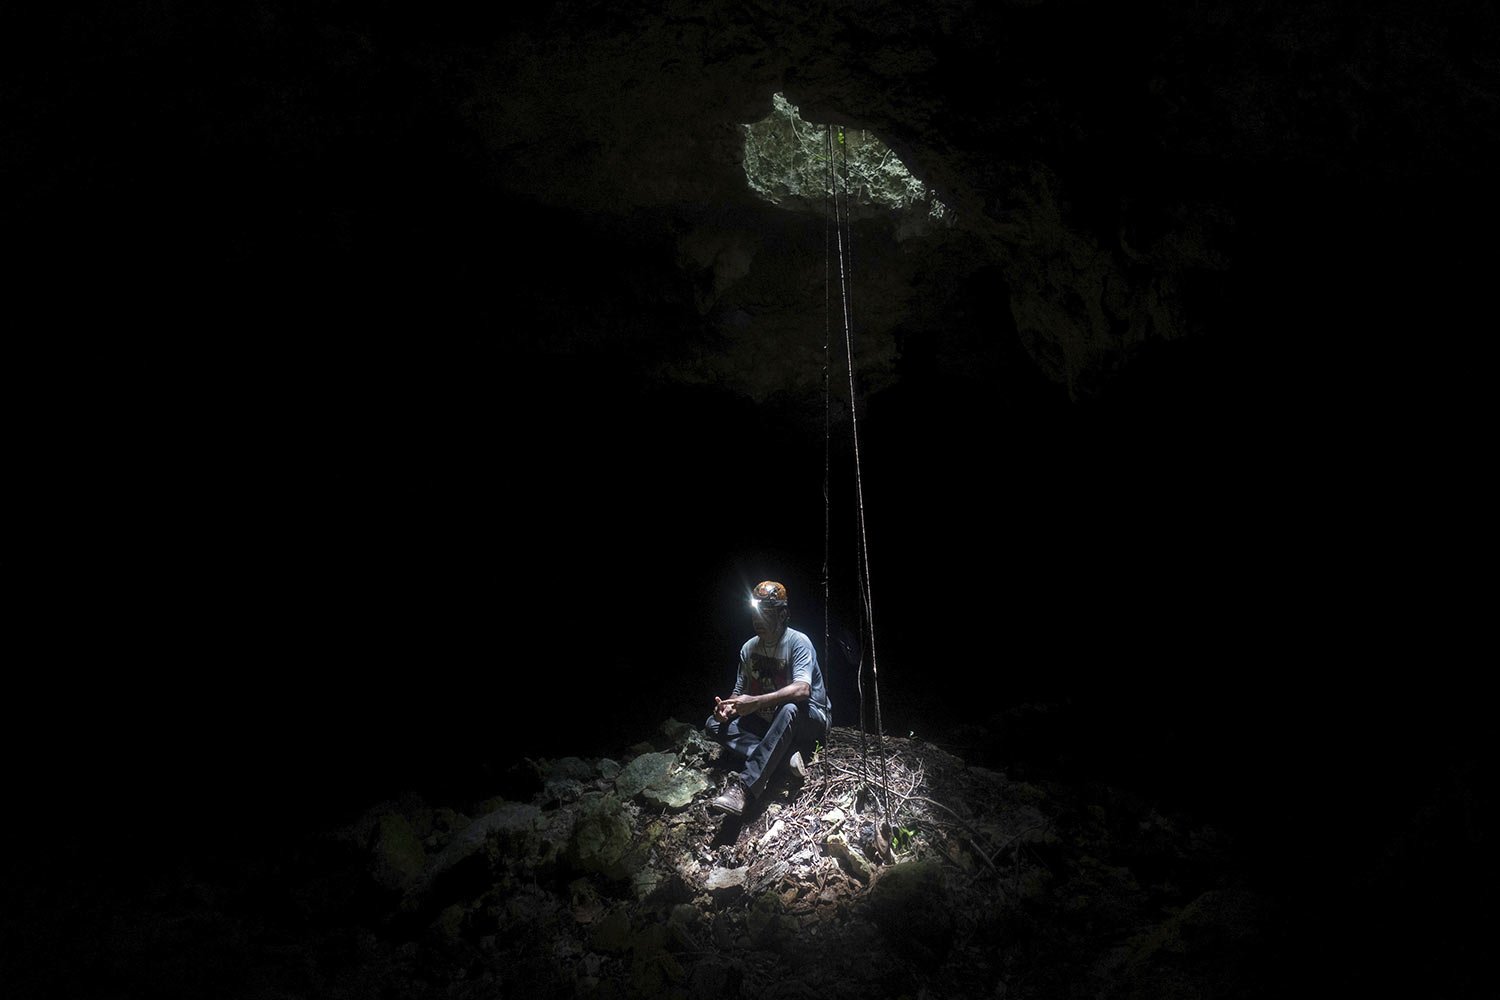  Raul Padilla, member of the Jaguar Wildlife Center which works to protect jaguars, poses for a portrait inside a miles-long cave system known as "Garra de Jaguar," or The Paw of the Jaguar," located underneath the planned route of the Maya Train in 